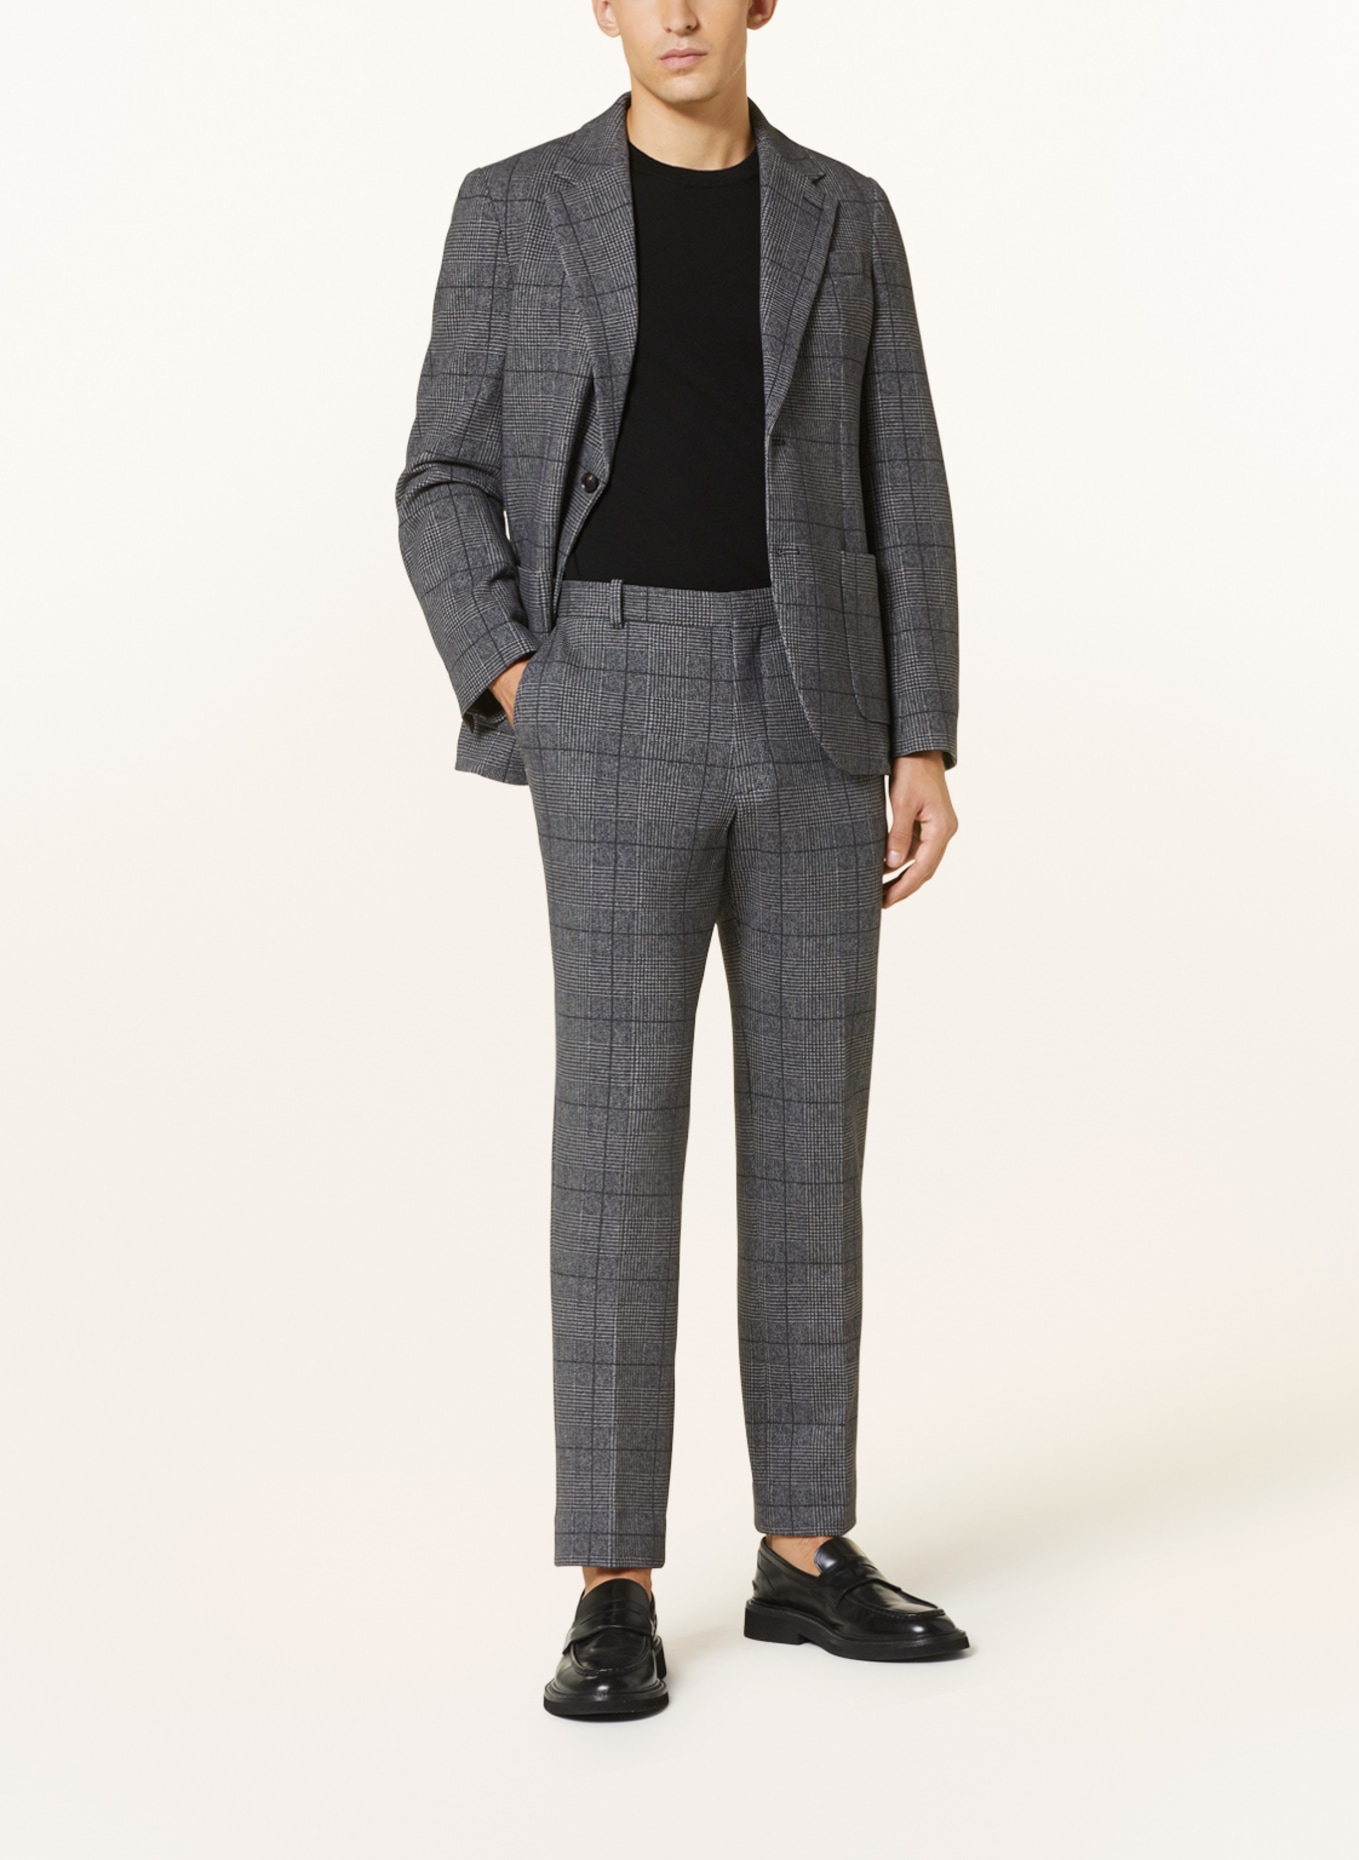 CIRCOLO 1901 Suit trousers regular fit made of jersey, Color: GRAY/ BLUE (Image 2)